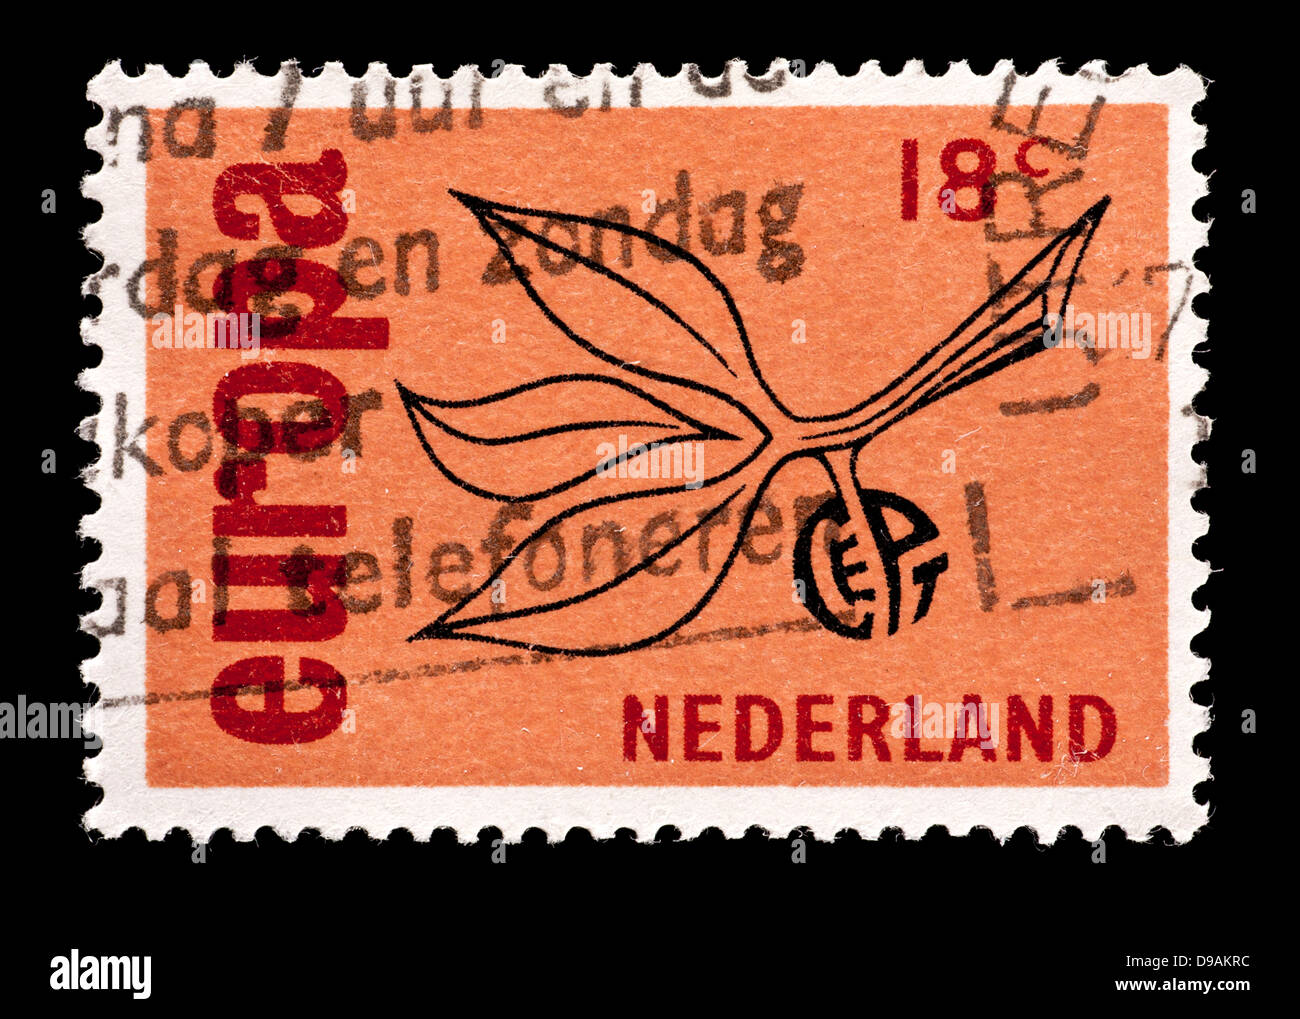 Postage stamp from the Netherlands issued for Europa. Stock Photo